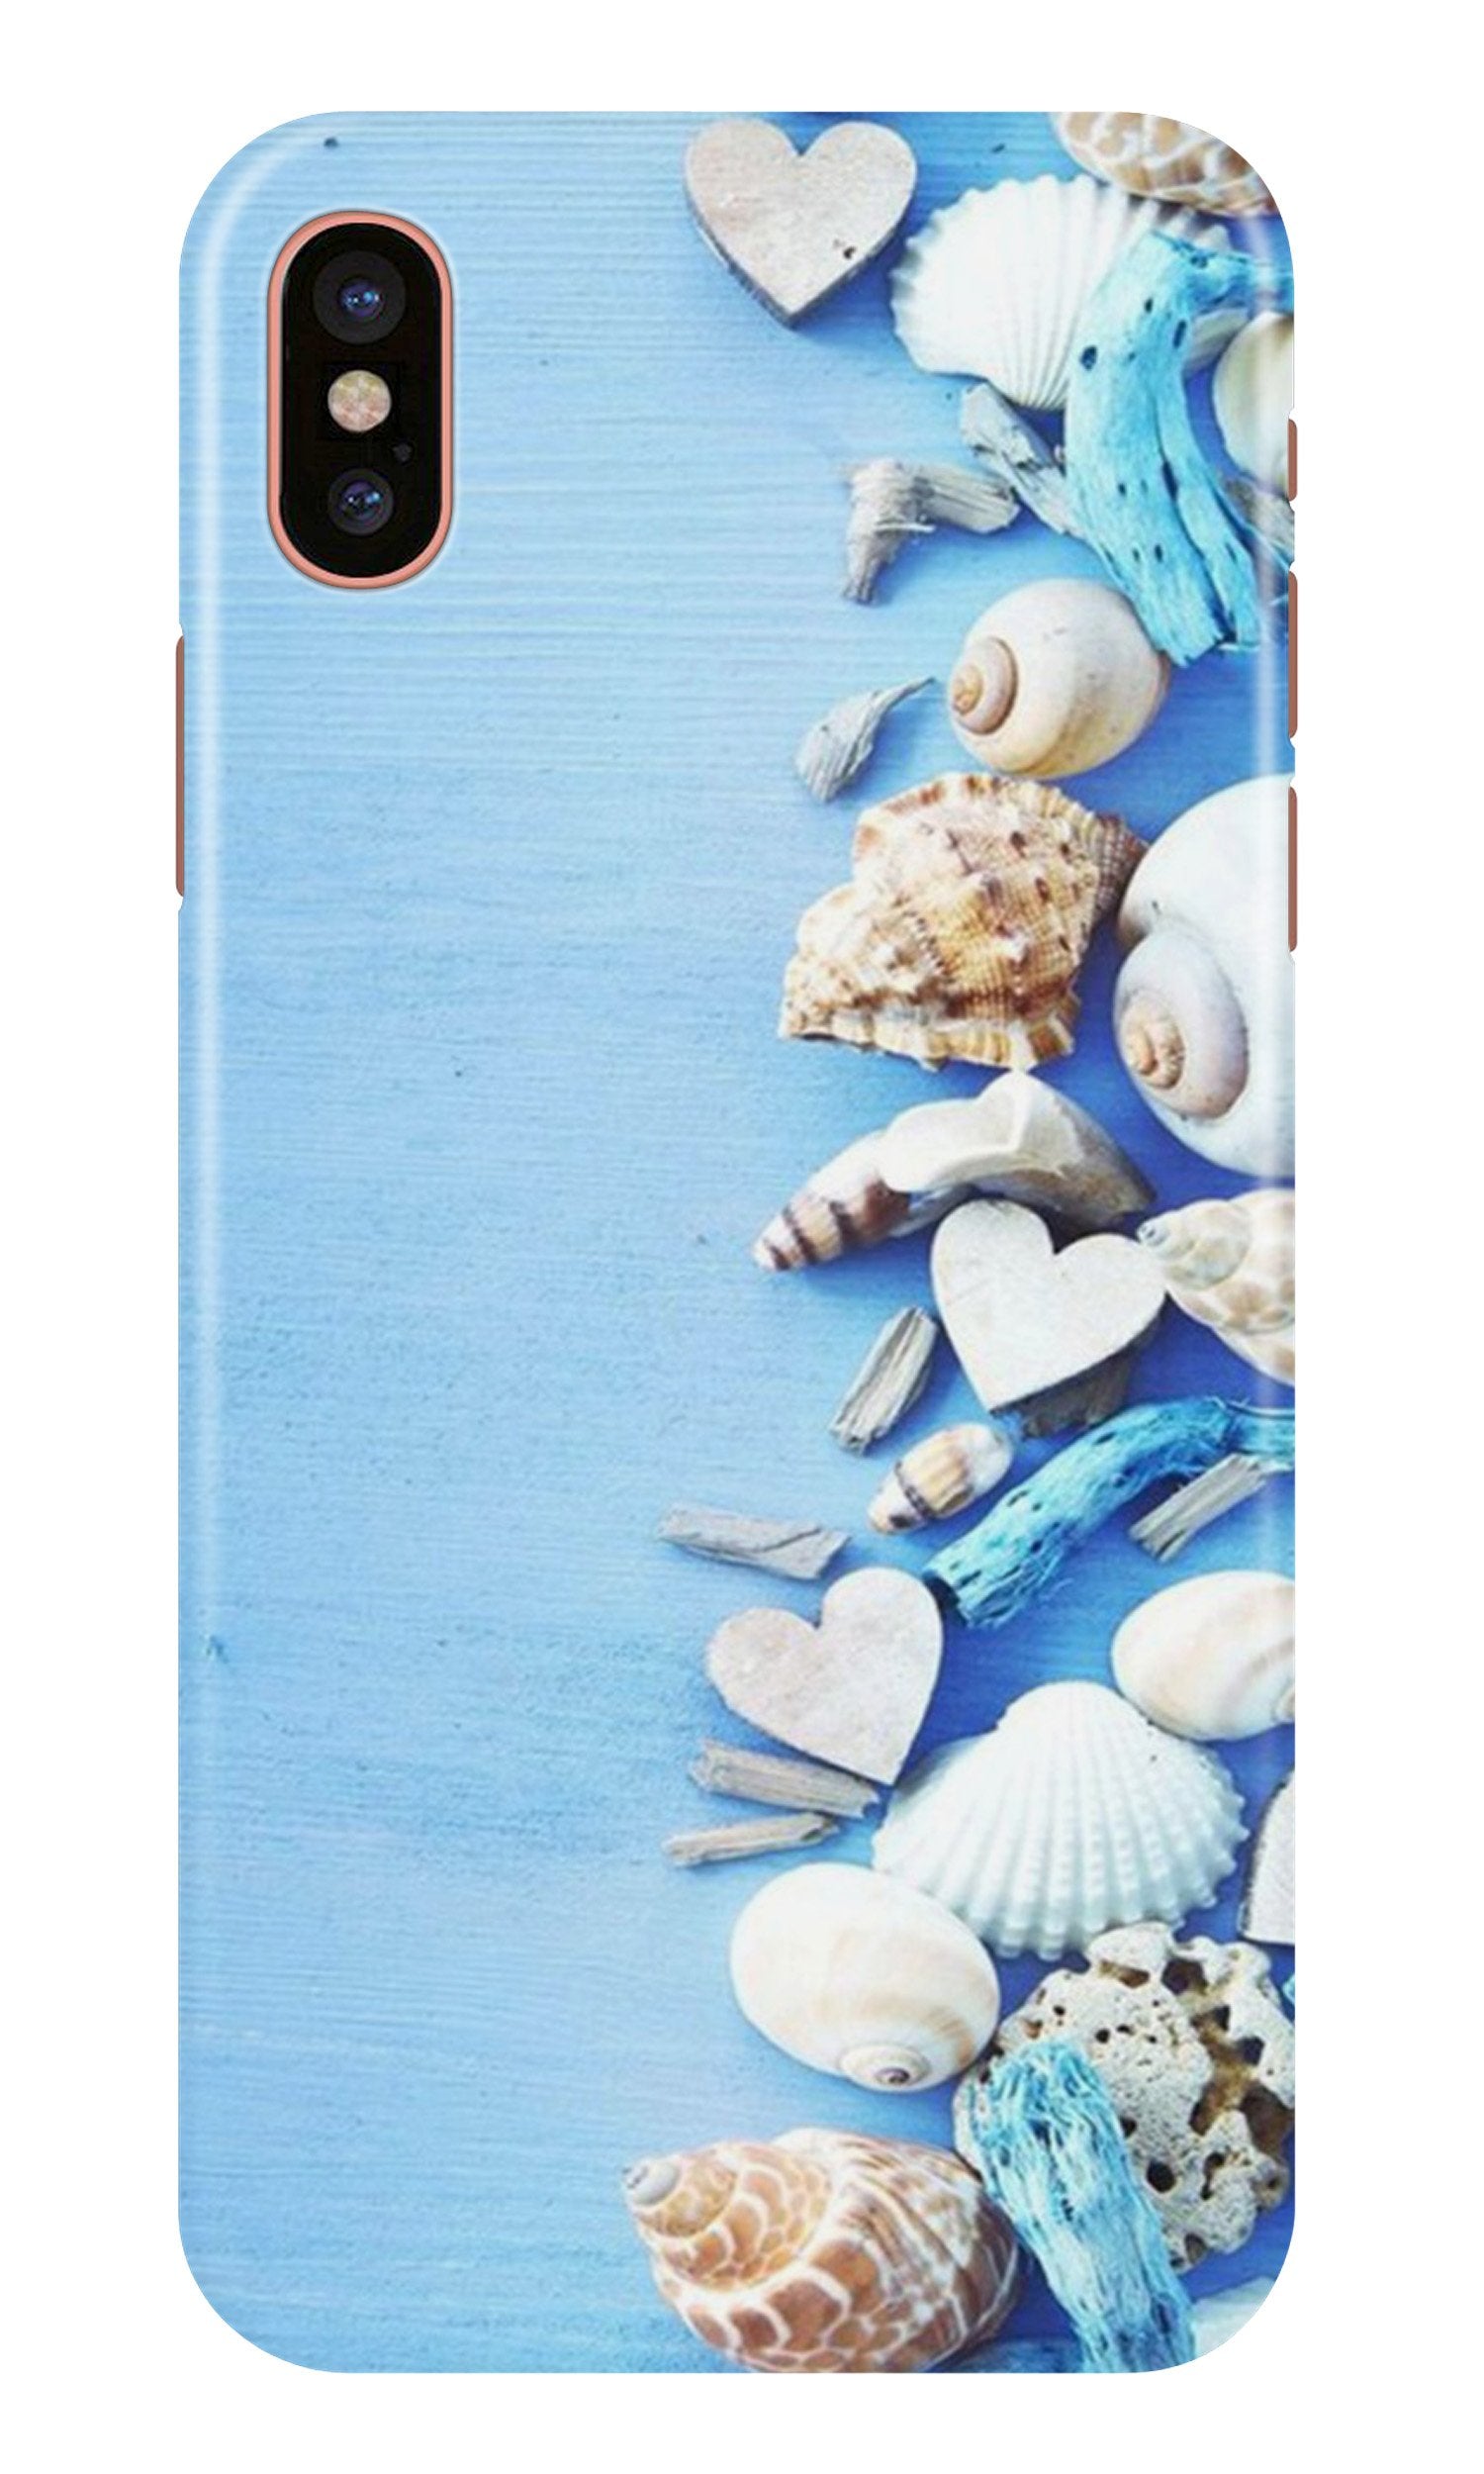 Sea Shells2 Case for iPhone Xs Max